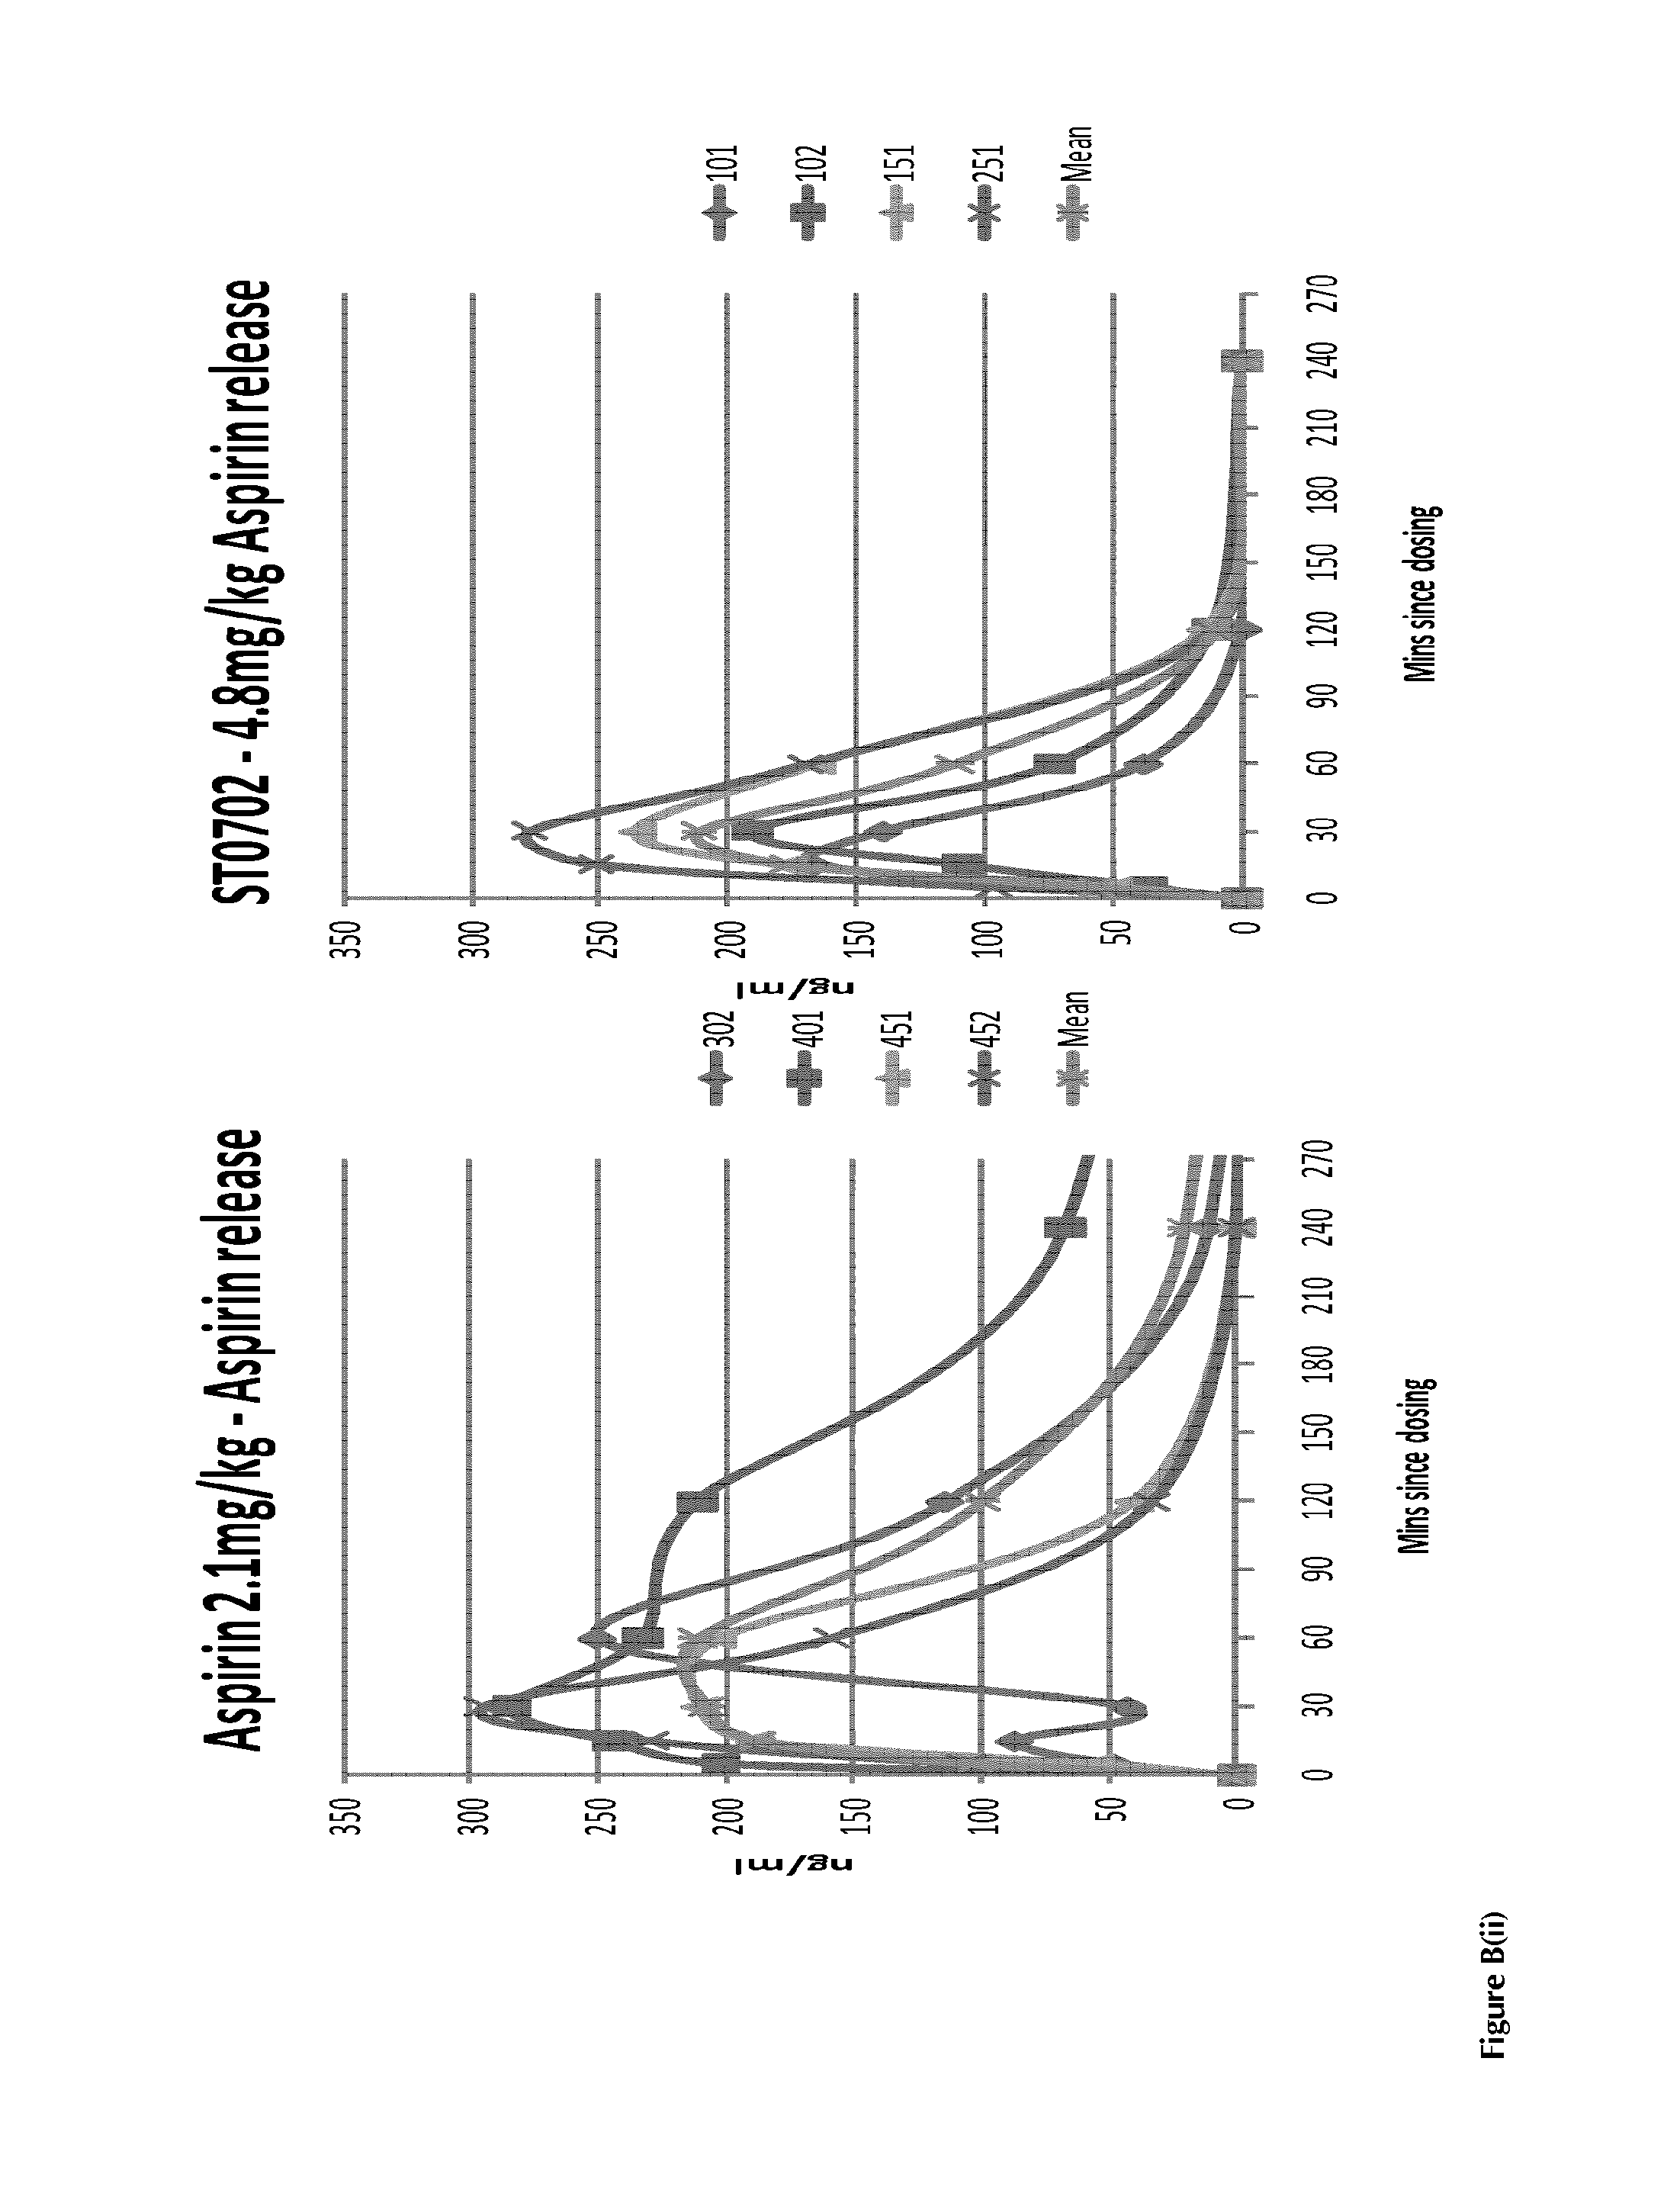 Compounds with super-aspirin effects